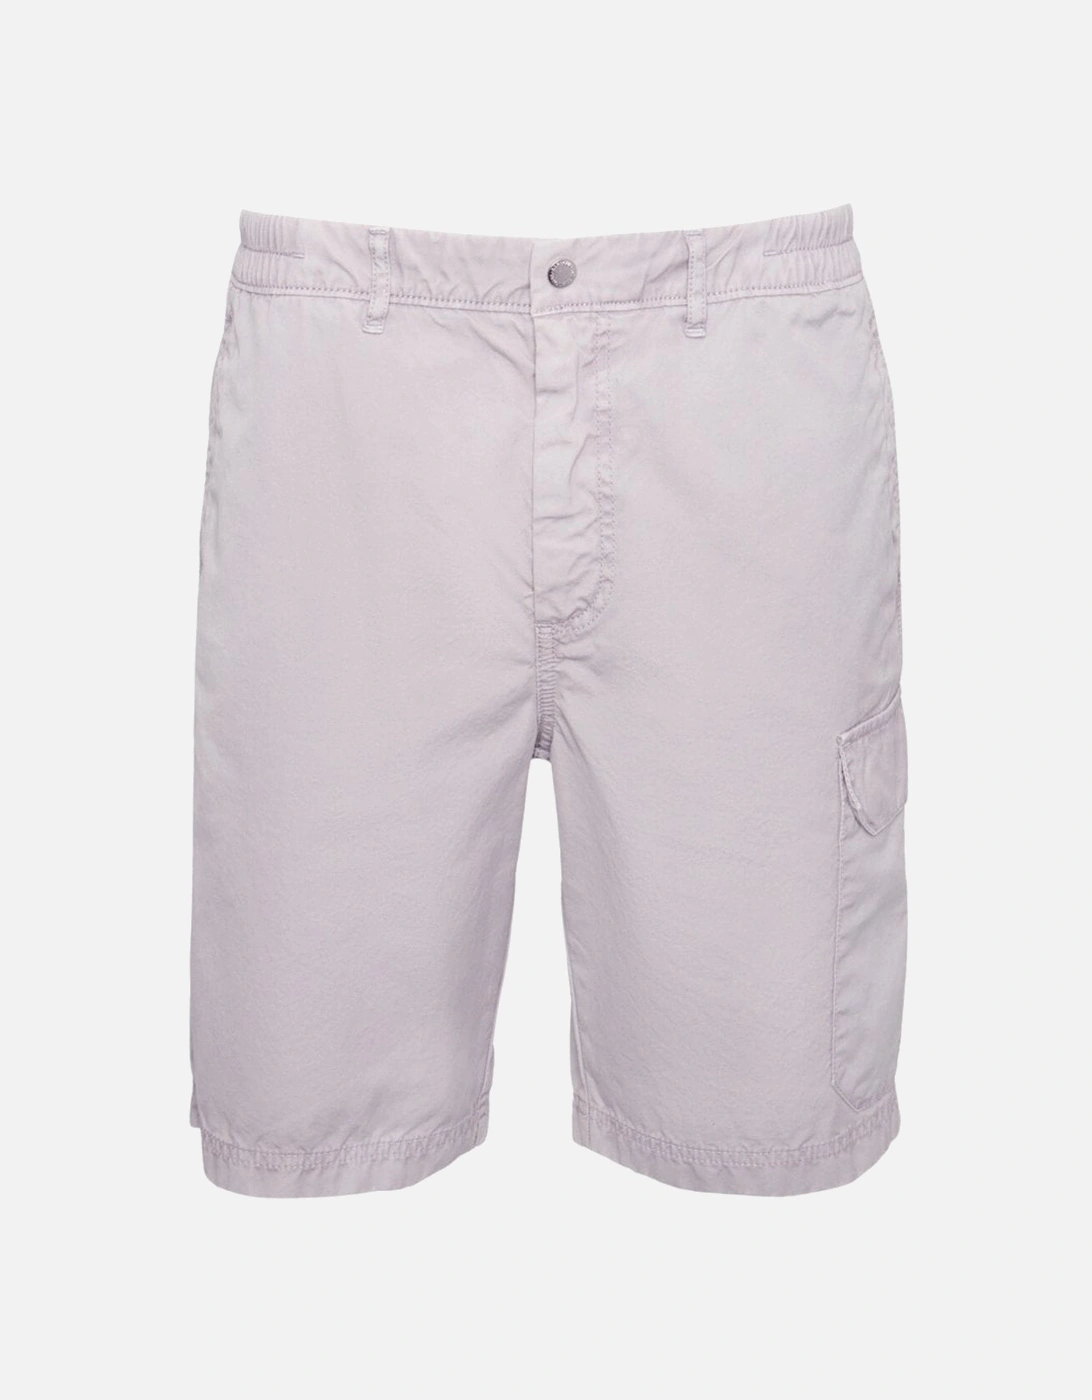 Gear Shorts - Ultimate Grey, 8 of 7